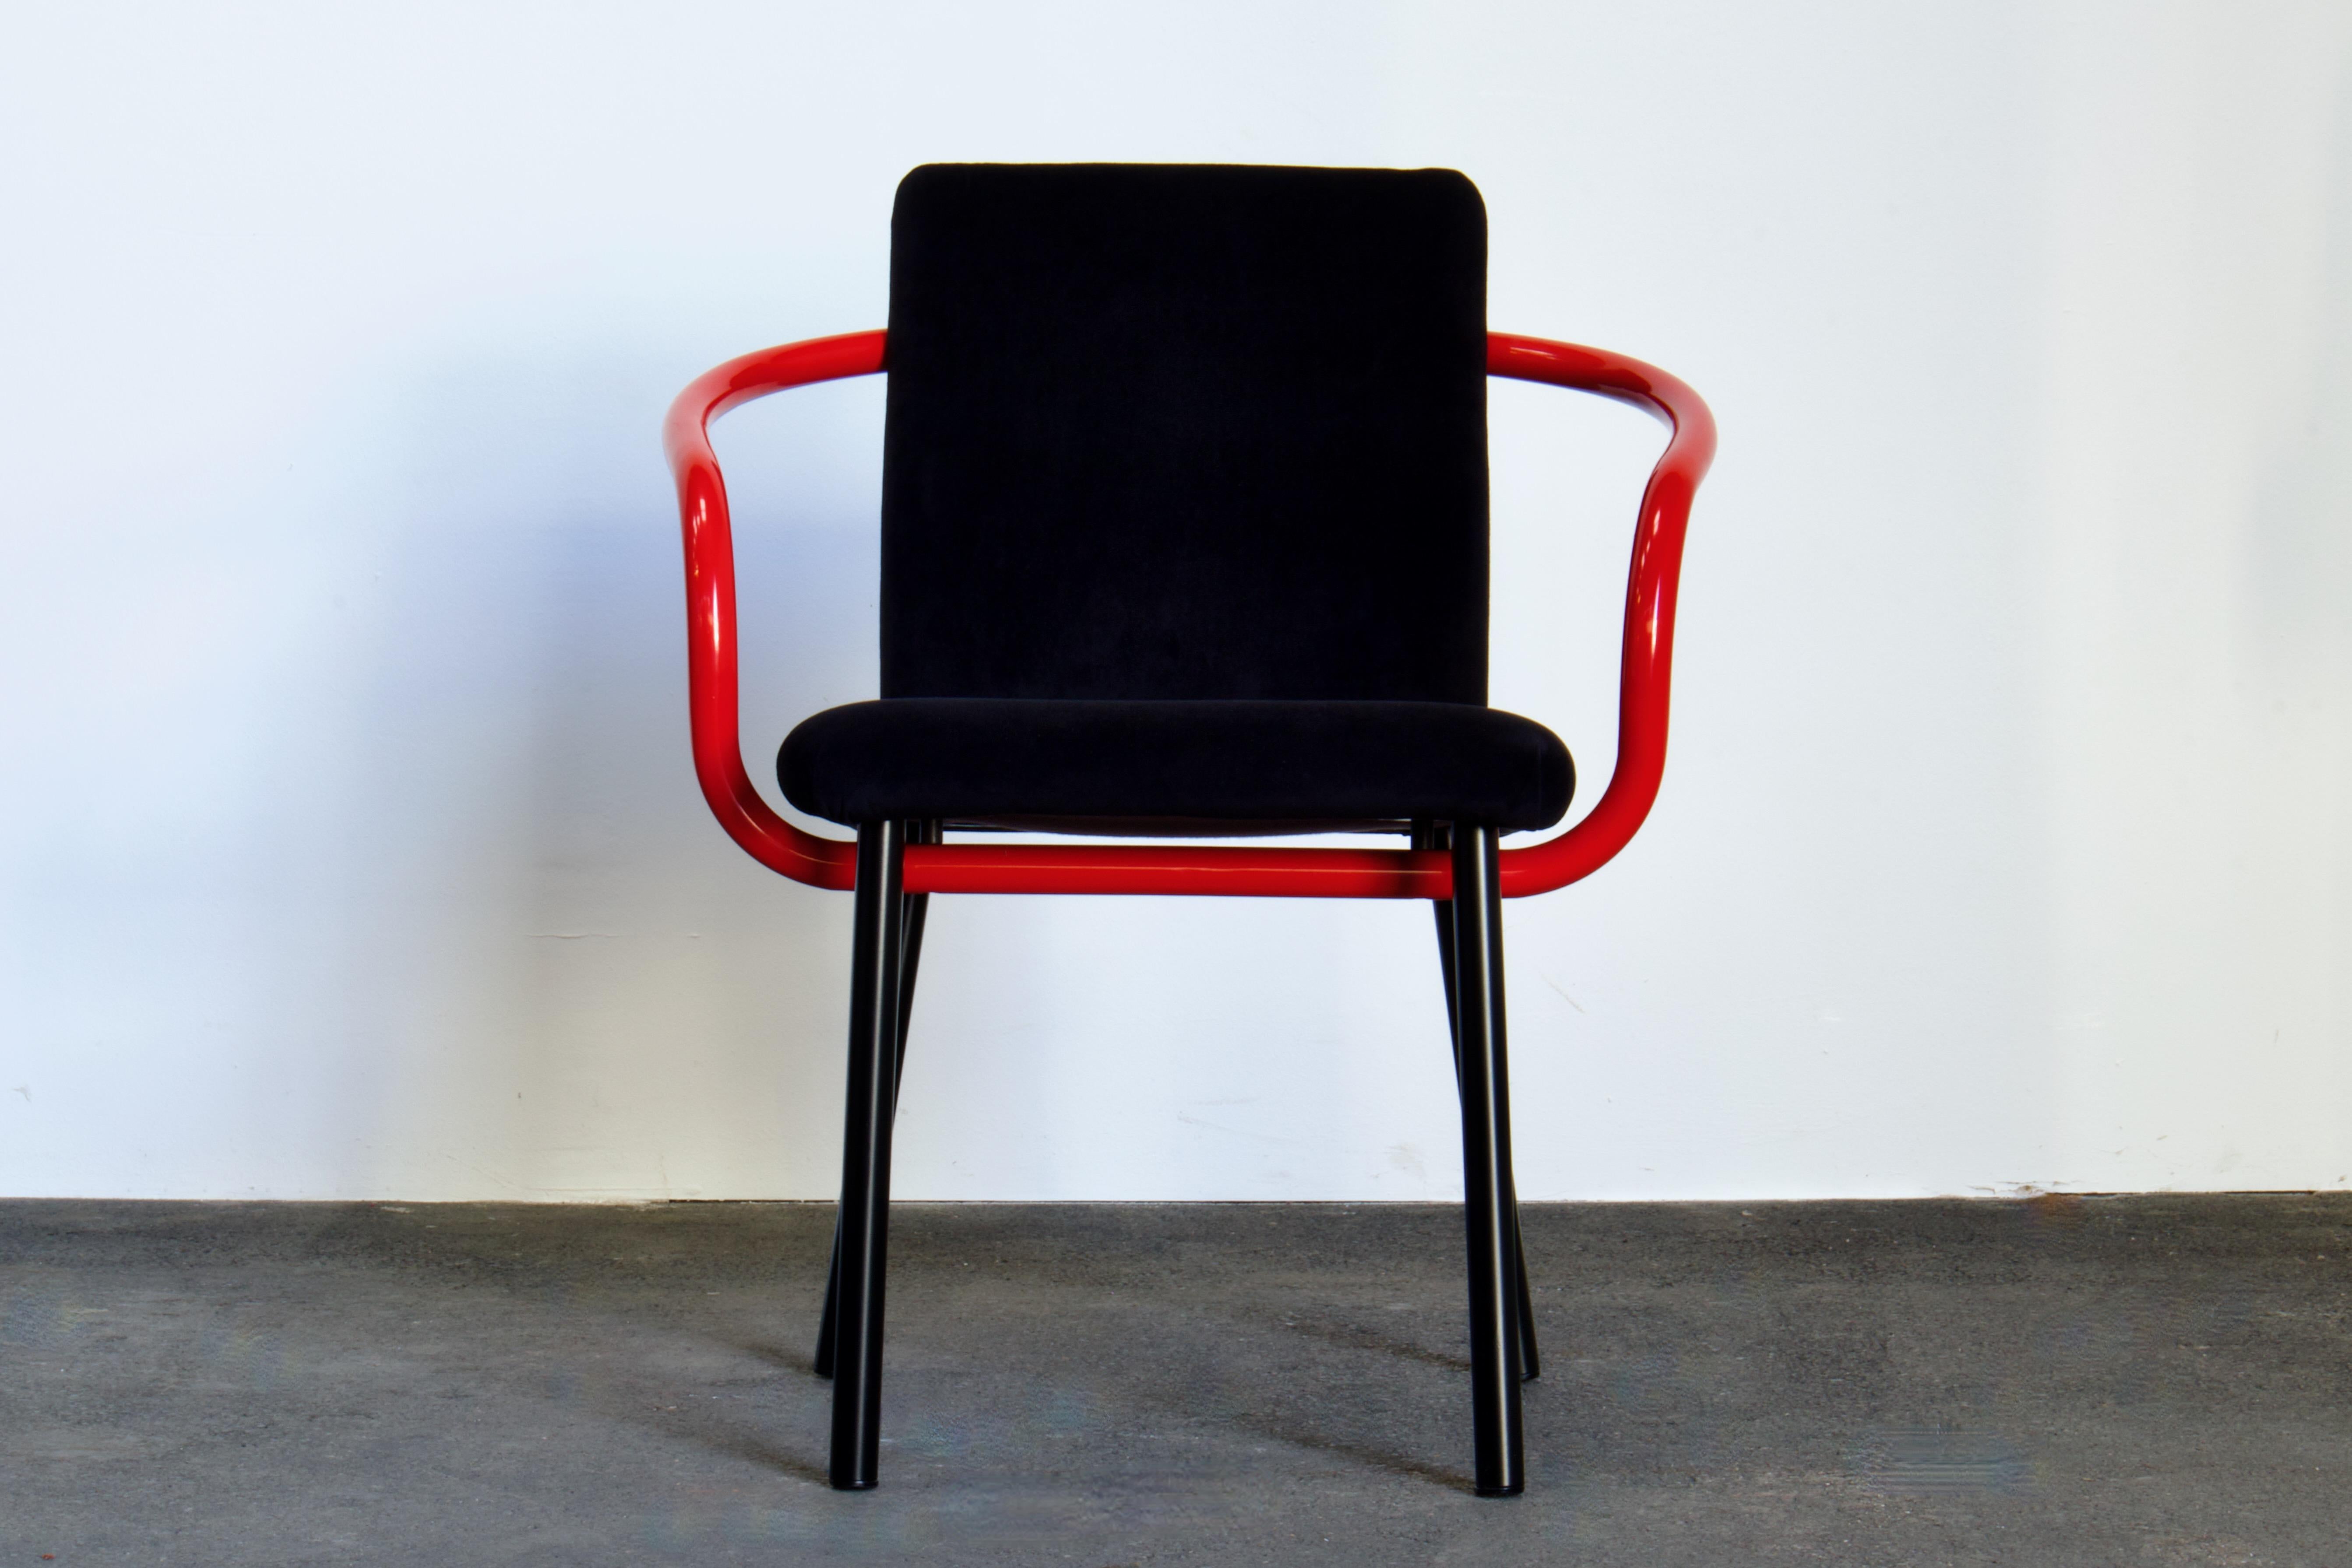 Icon of the Memphis Milano Movement. A set of four Ettore Sottsass Mandarin chairs for Knoll. Black Alcantara upholstery. Arms in red lacquer.

A 1986 design by Ettore Sottsass for Knoll, the Mandarin chair consists of a flat rectangular seat